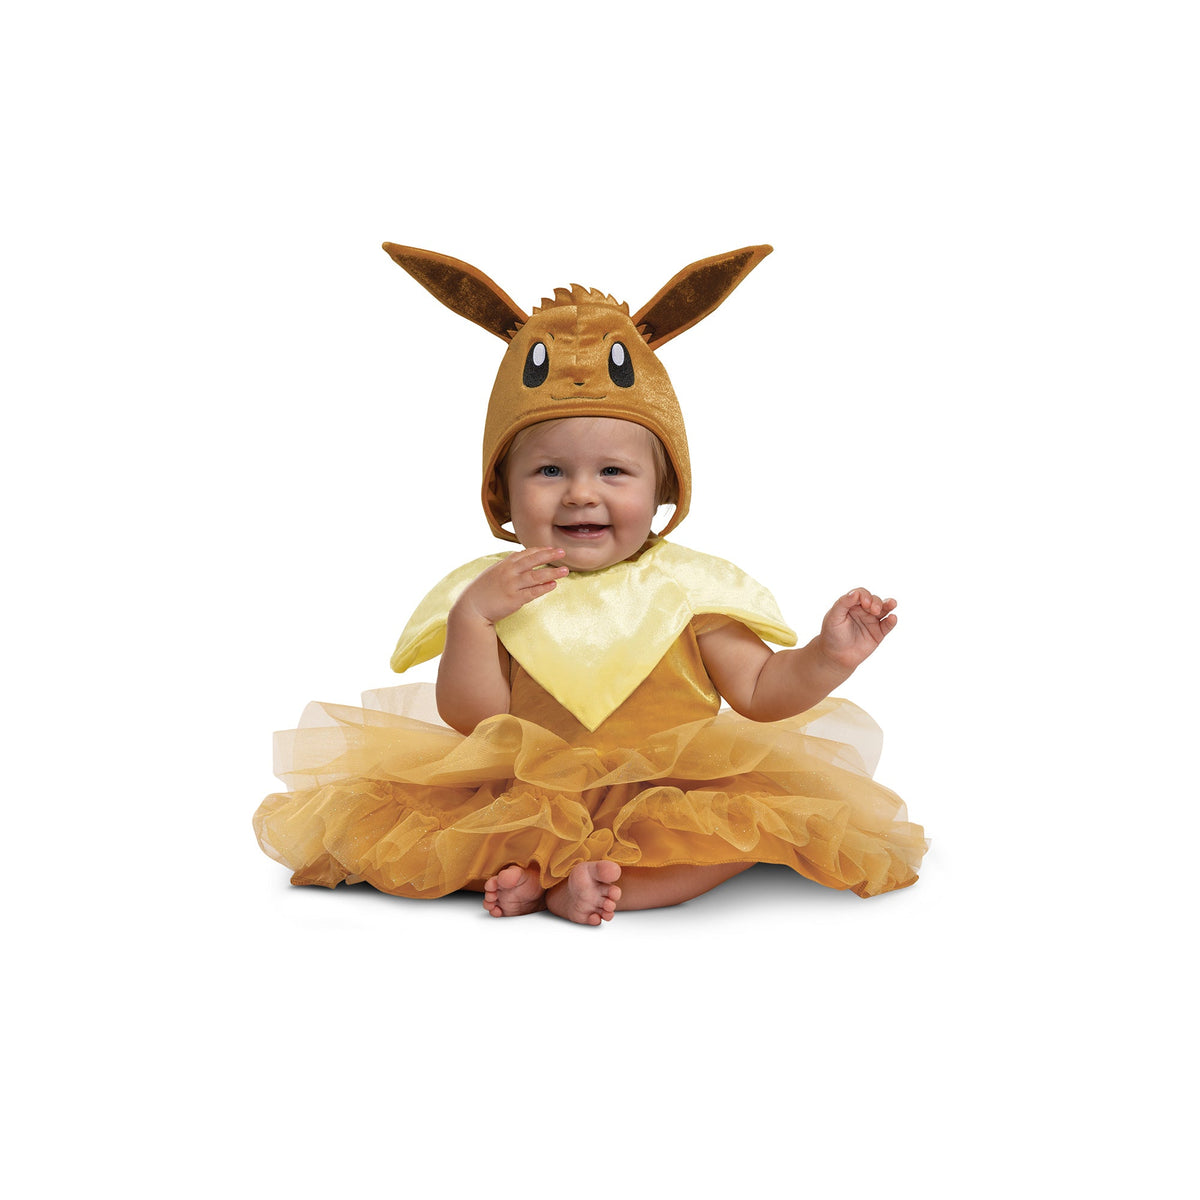 DISGUISE (TOY-SPORT) Costumes Pokémon Eevee Tutu Dress Costume for Babies and Toddlers, Brown Tutu Dress